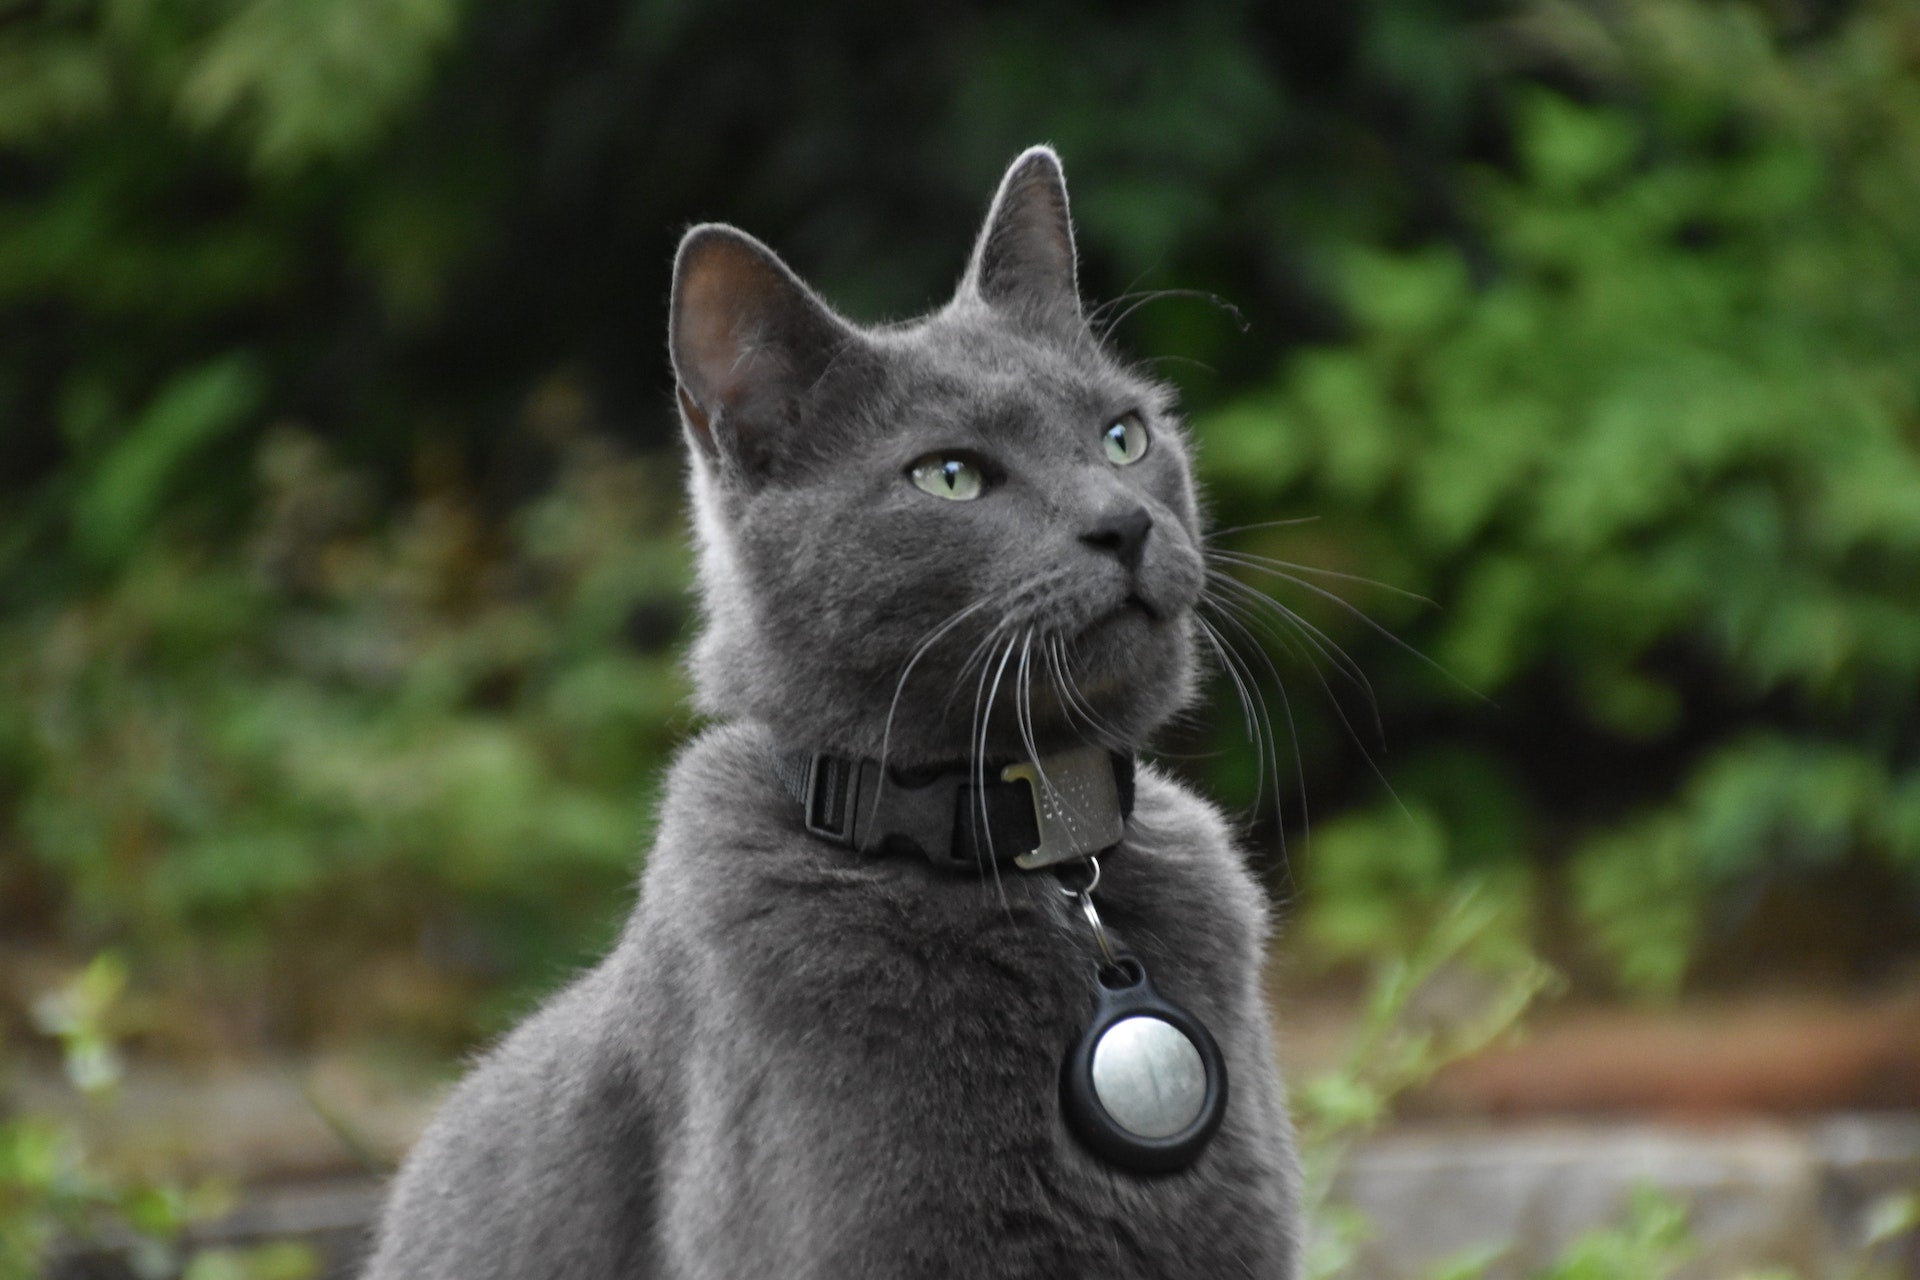 https://cdn.shopify.com/s/files/1/0079/3640/9658/files/invisible-cat-fence-cat-wearing-collar.jpg?v=1666602790